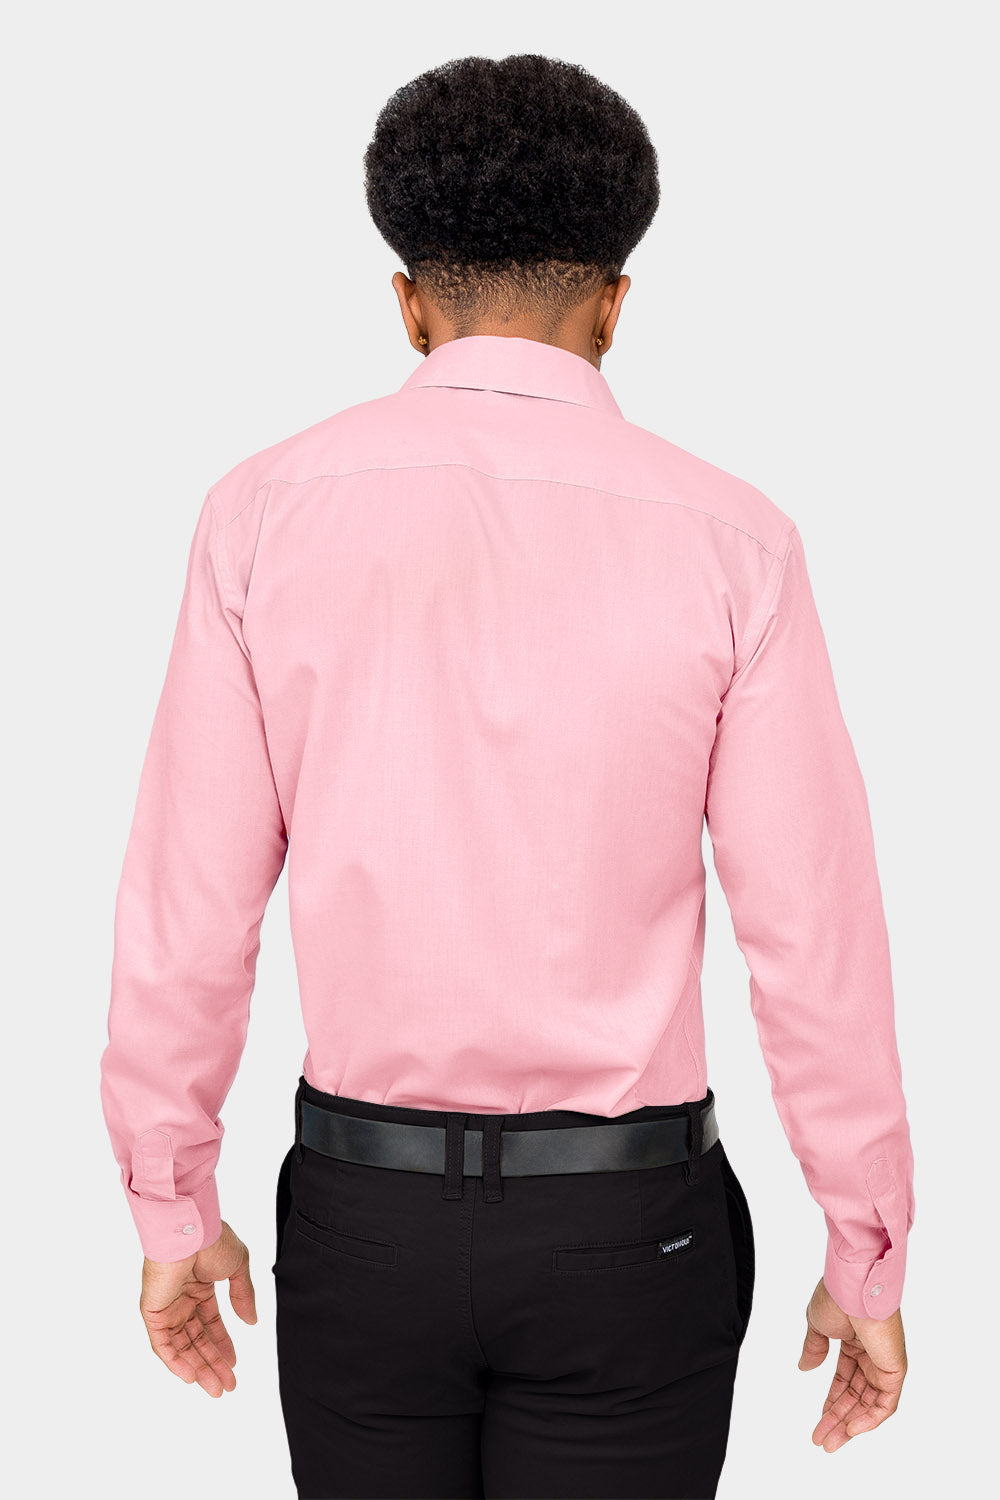 Mens Slim Fit Solid Color Dress Shirt Pink G Style Usa